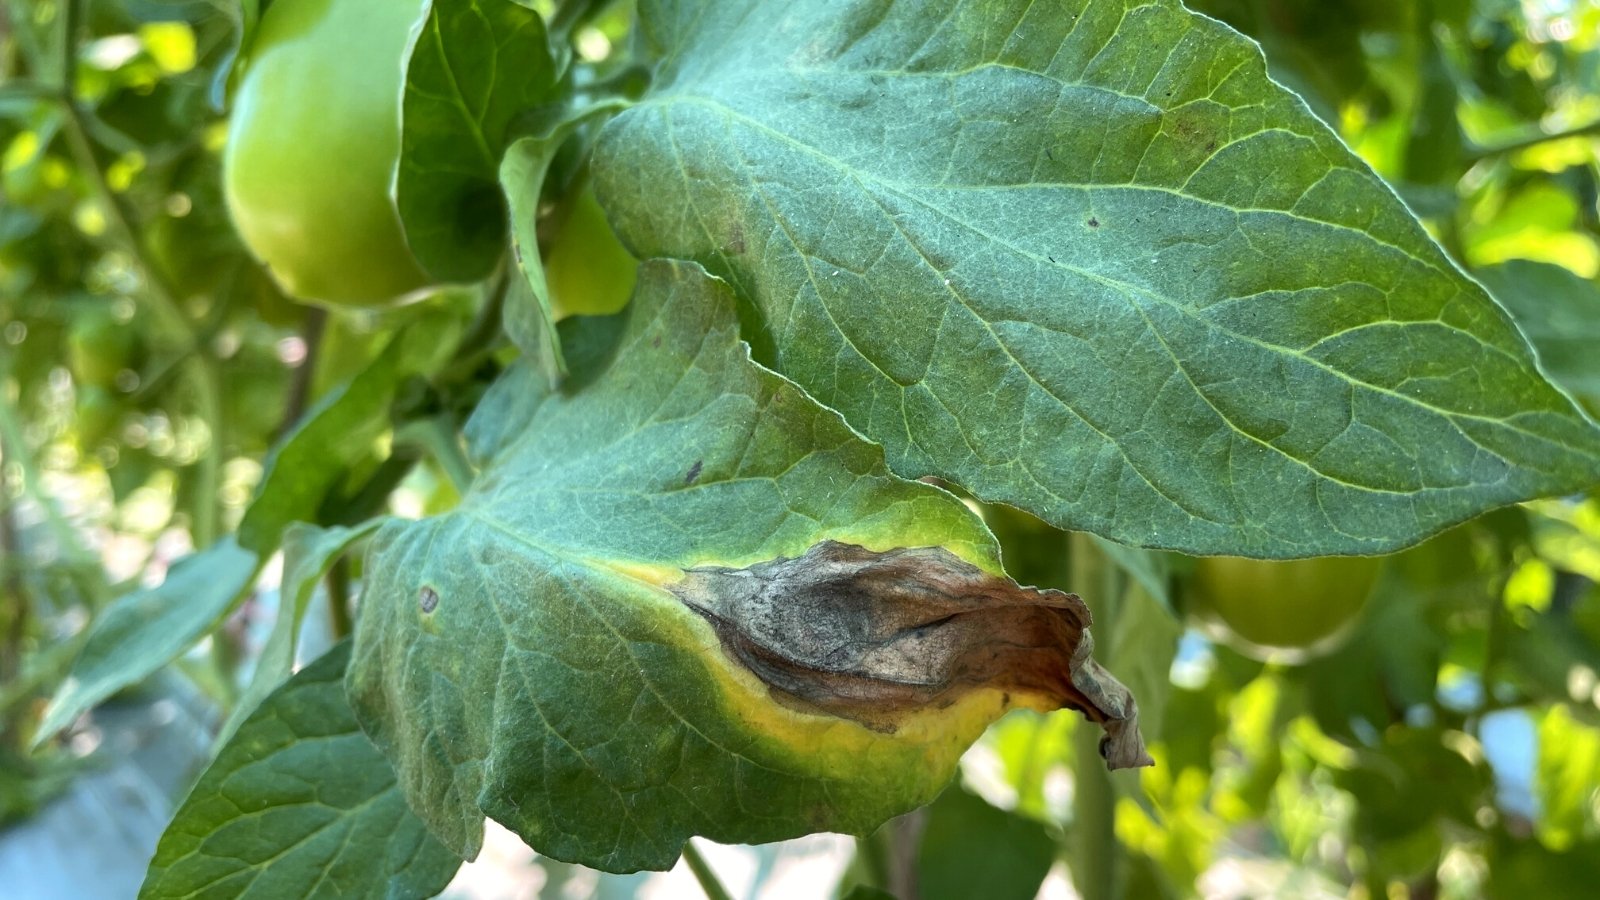 Early Blight in Tomatoes